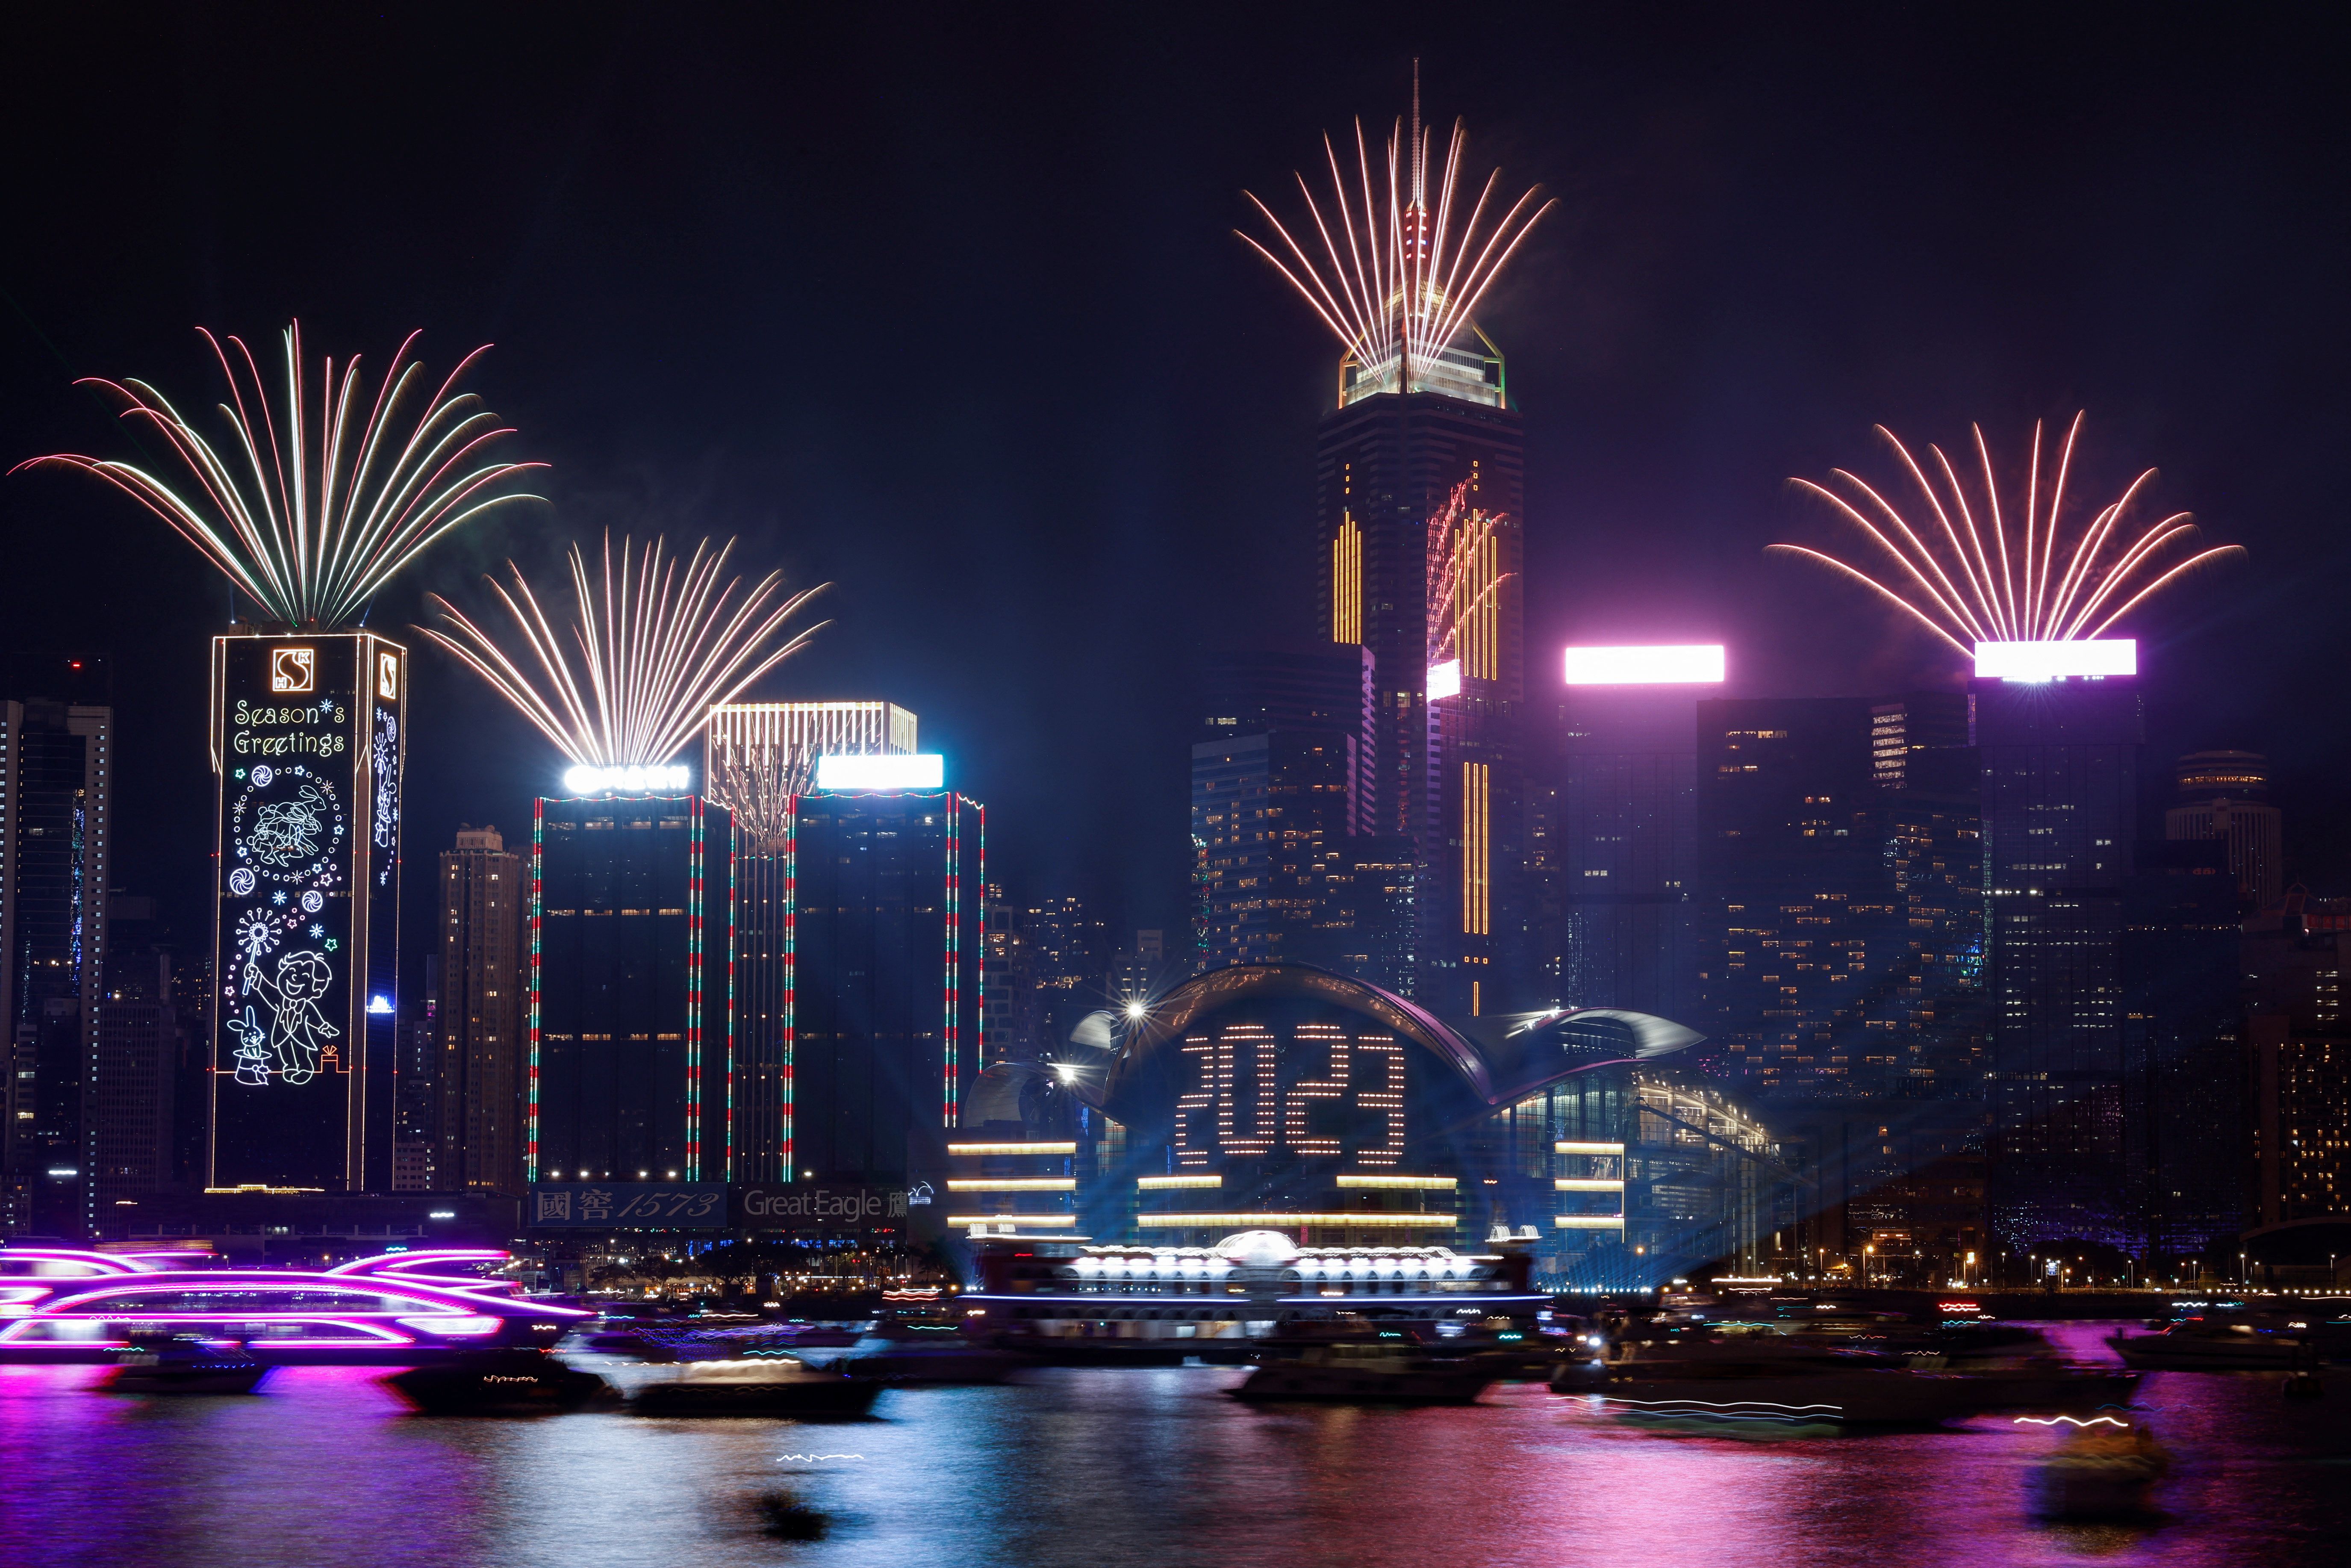 Fireworks explode over Victoria Harbor to celebrate the New Year in Hong Kong, China on January 1, 2023.